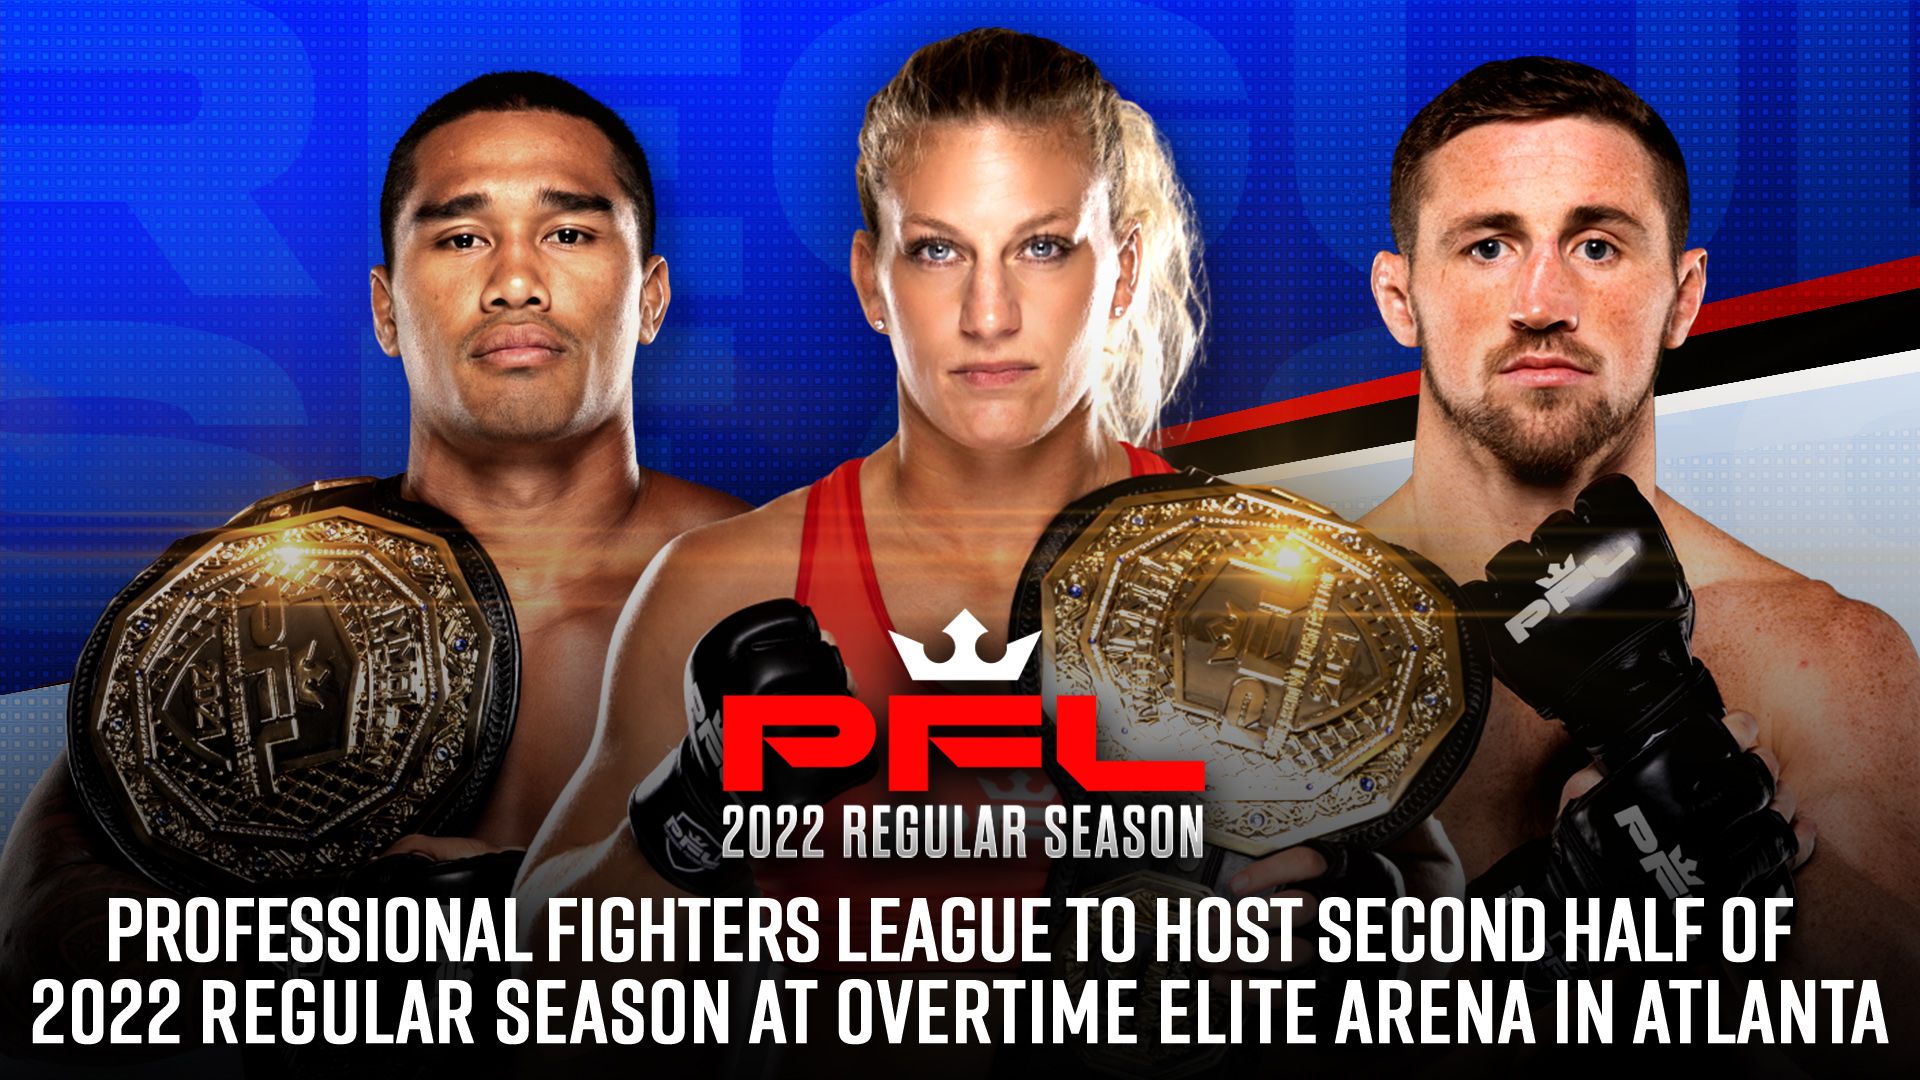 PFL MMA to host events on June 17, June 24 and July 1 live on ESPN networks and streaming platforms